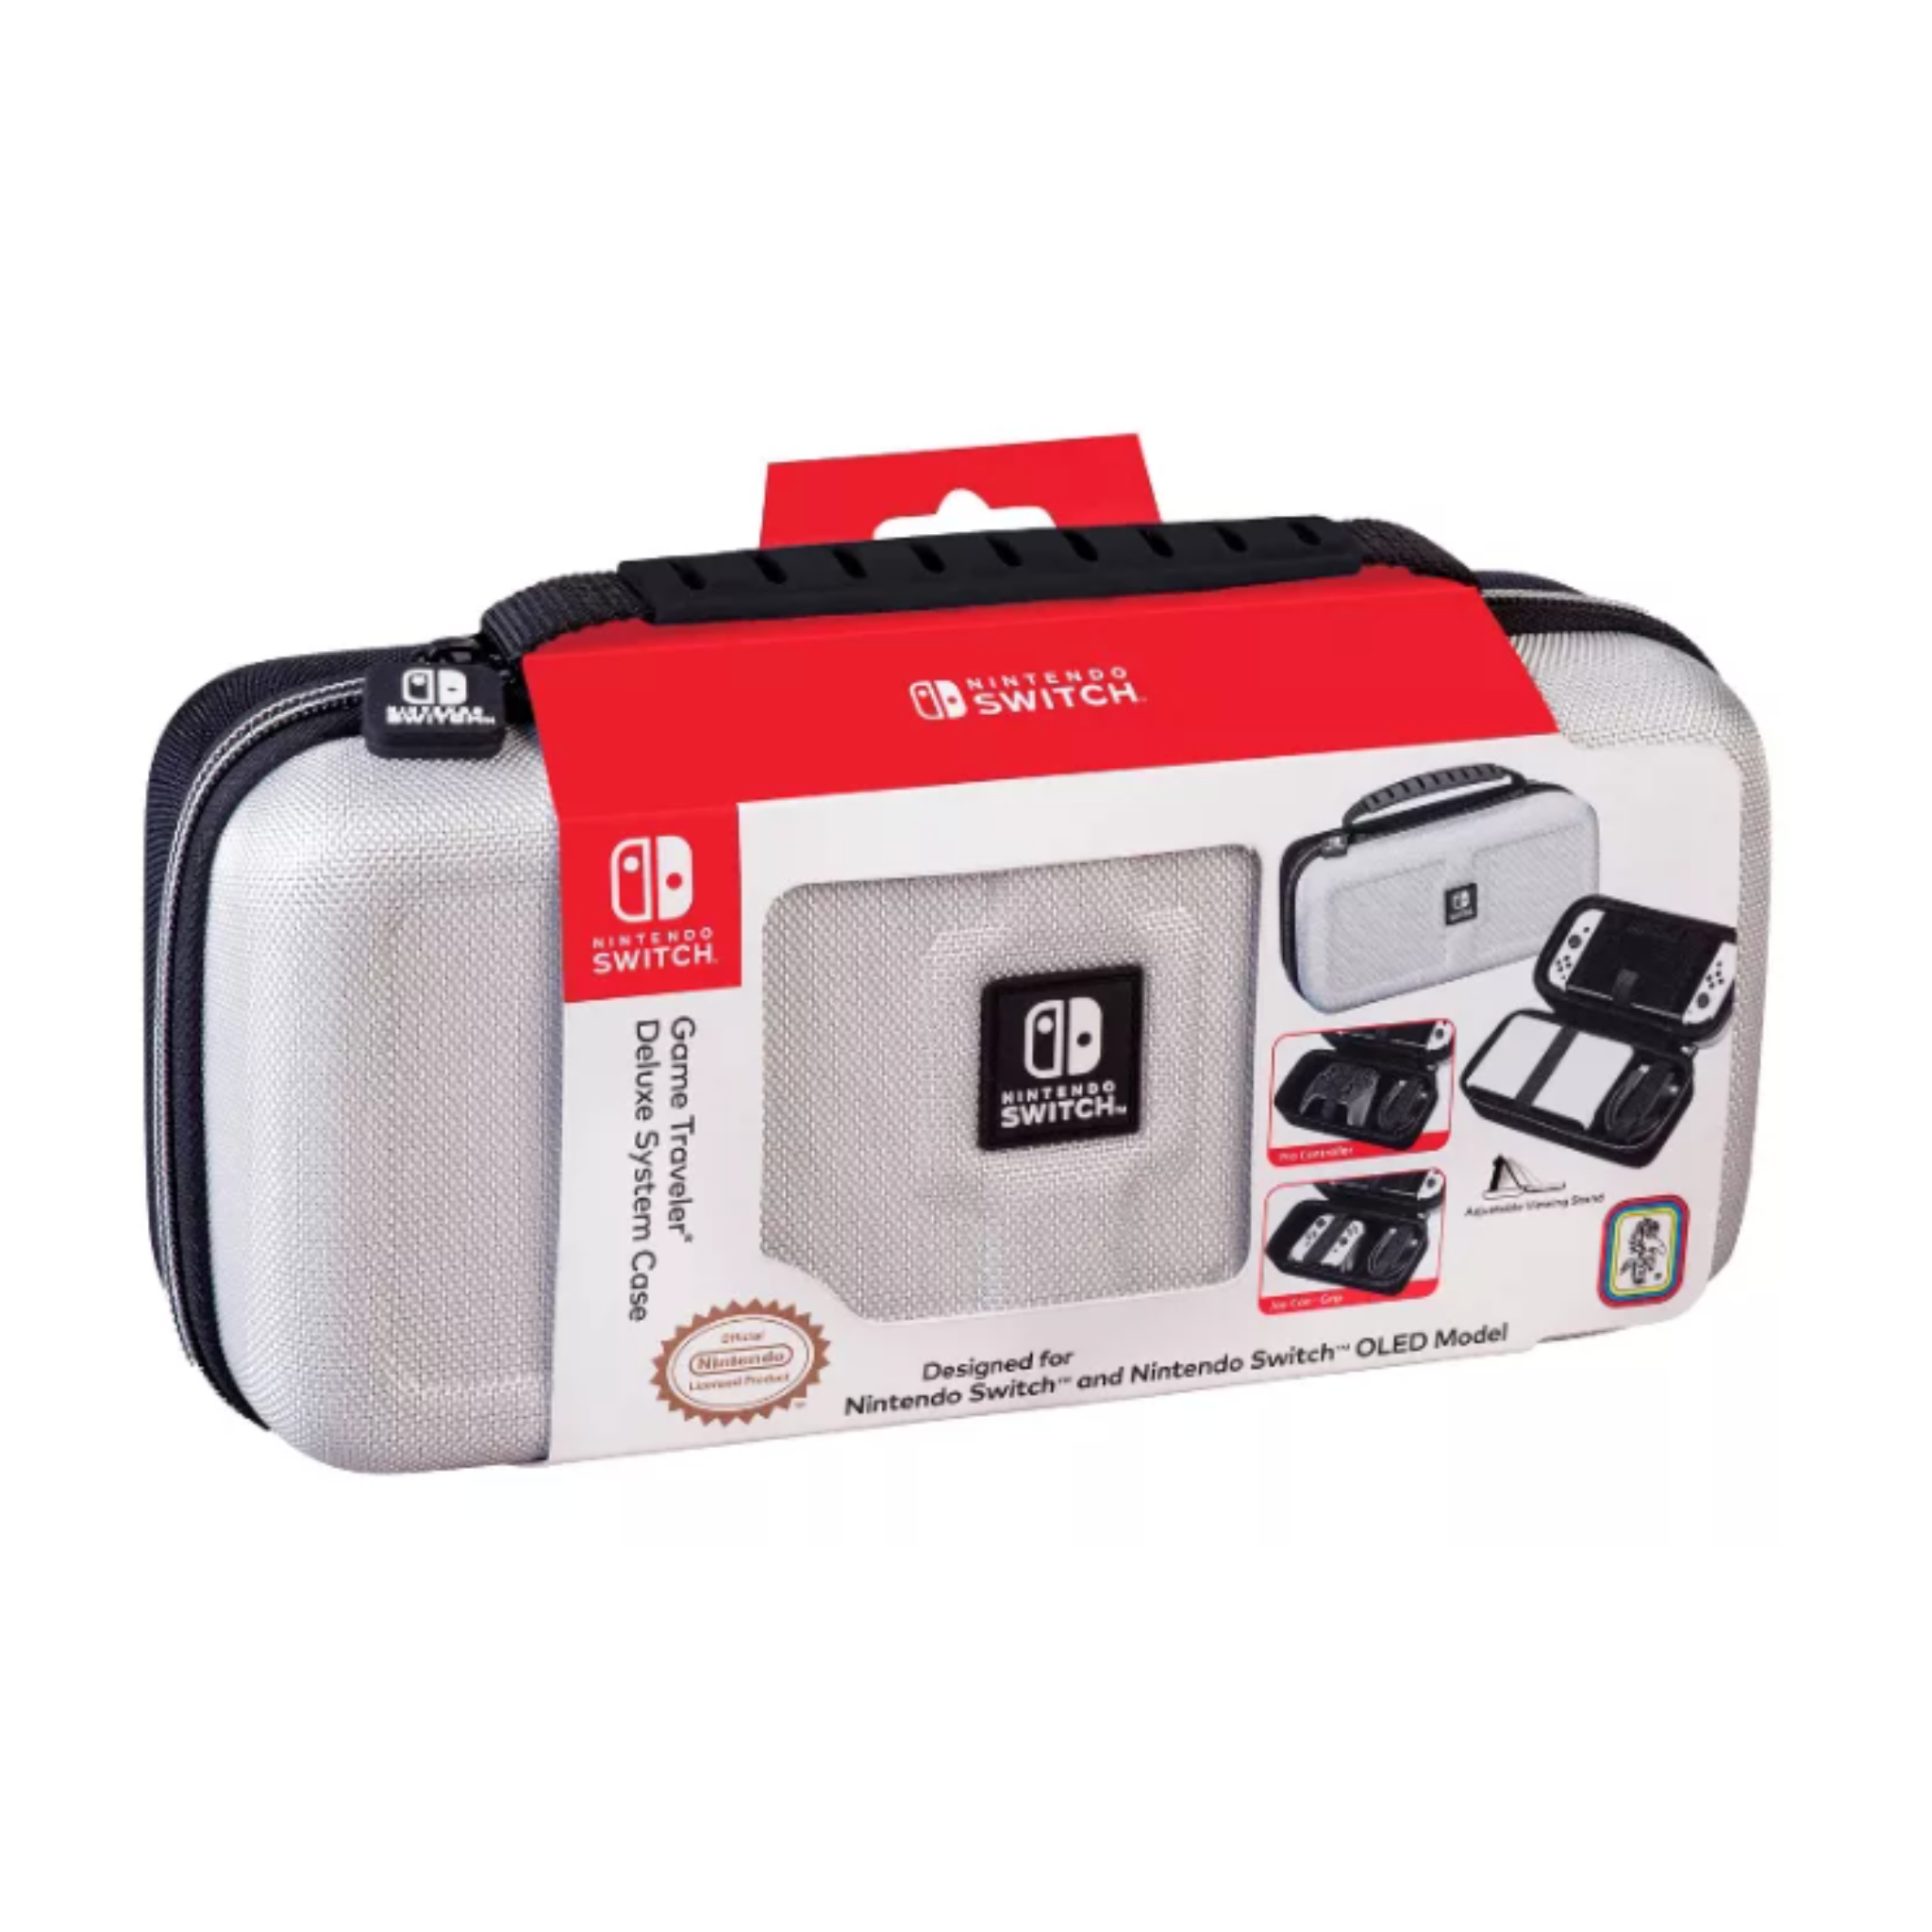 Image of Nintendo Switch System Case for Nintendo Switch and Nintendo Switch Oled - White